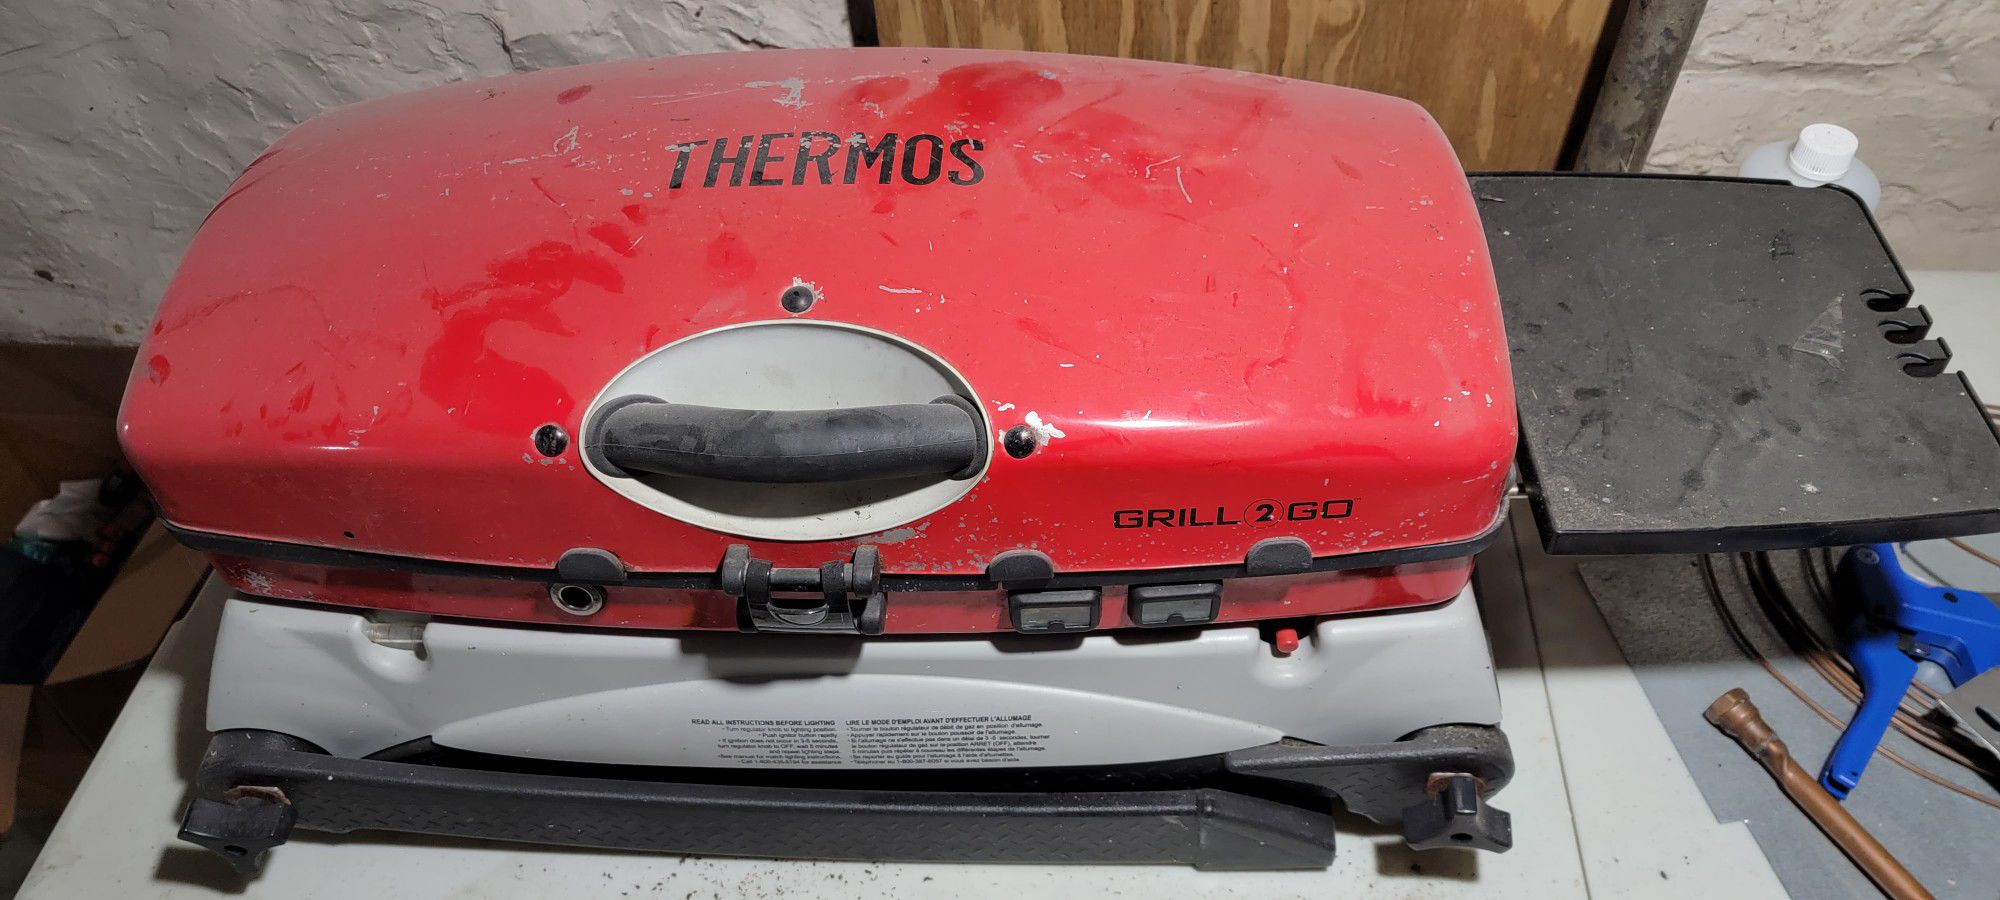 Thermos Portable tailgate grill